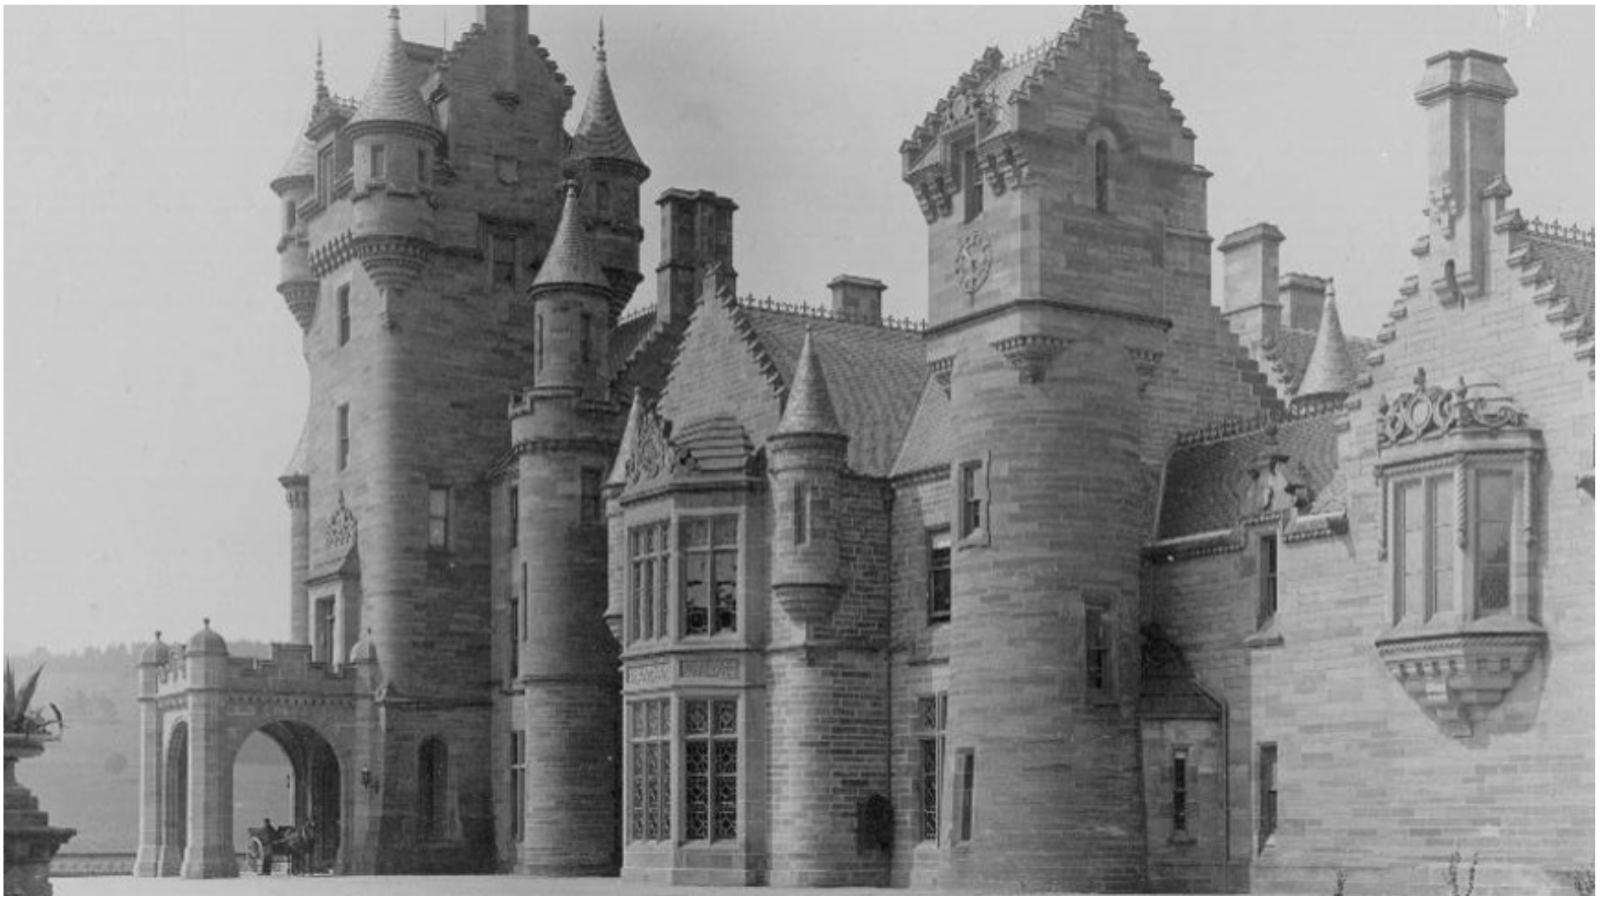 Ardross Castle was built in the 19th century after the estate was bought in the 1700s.